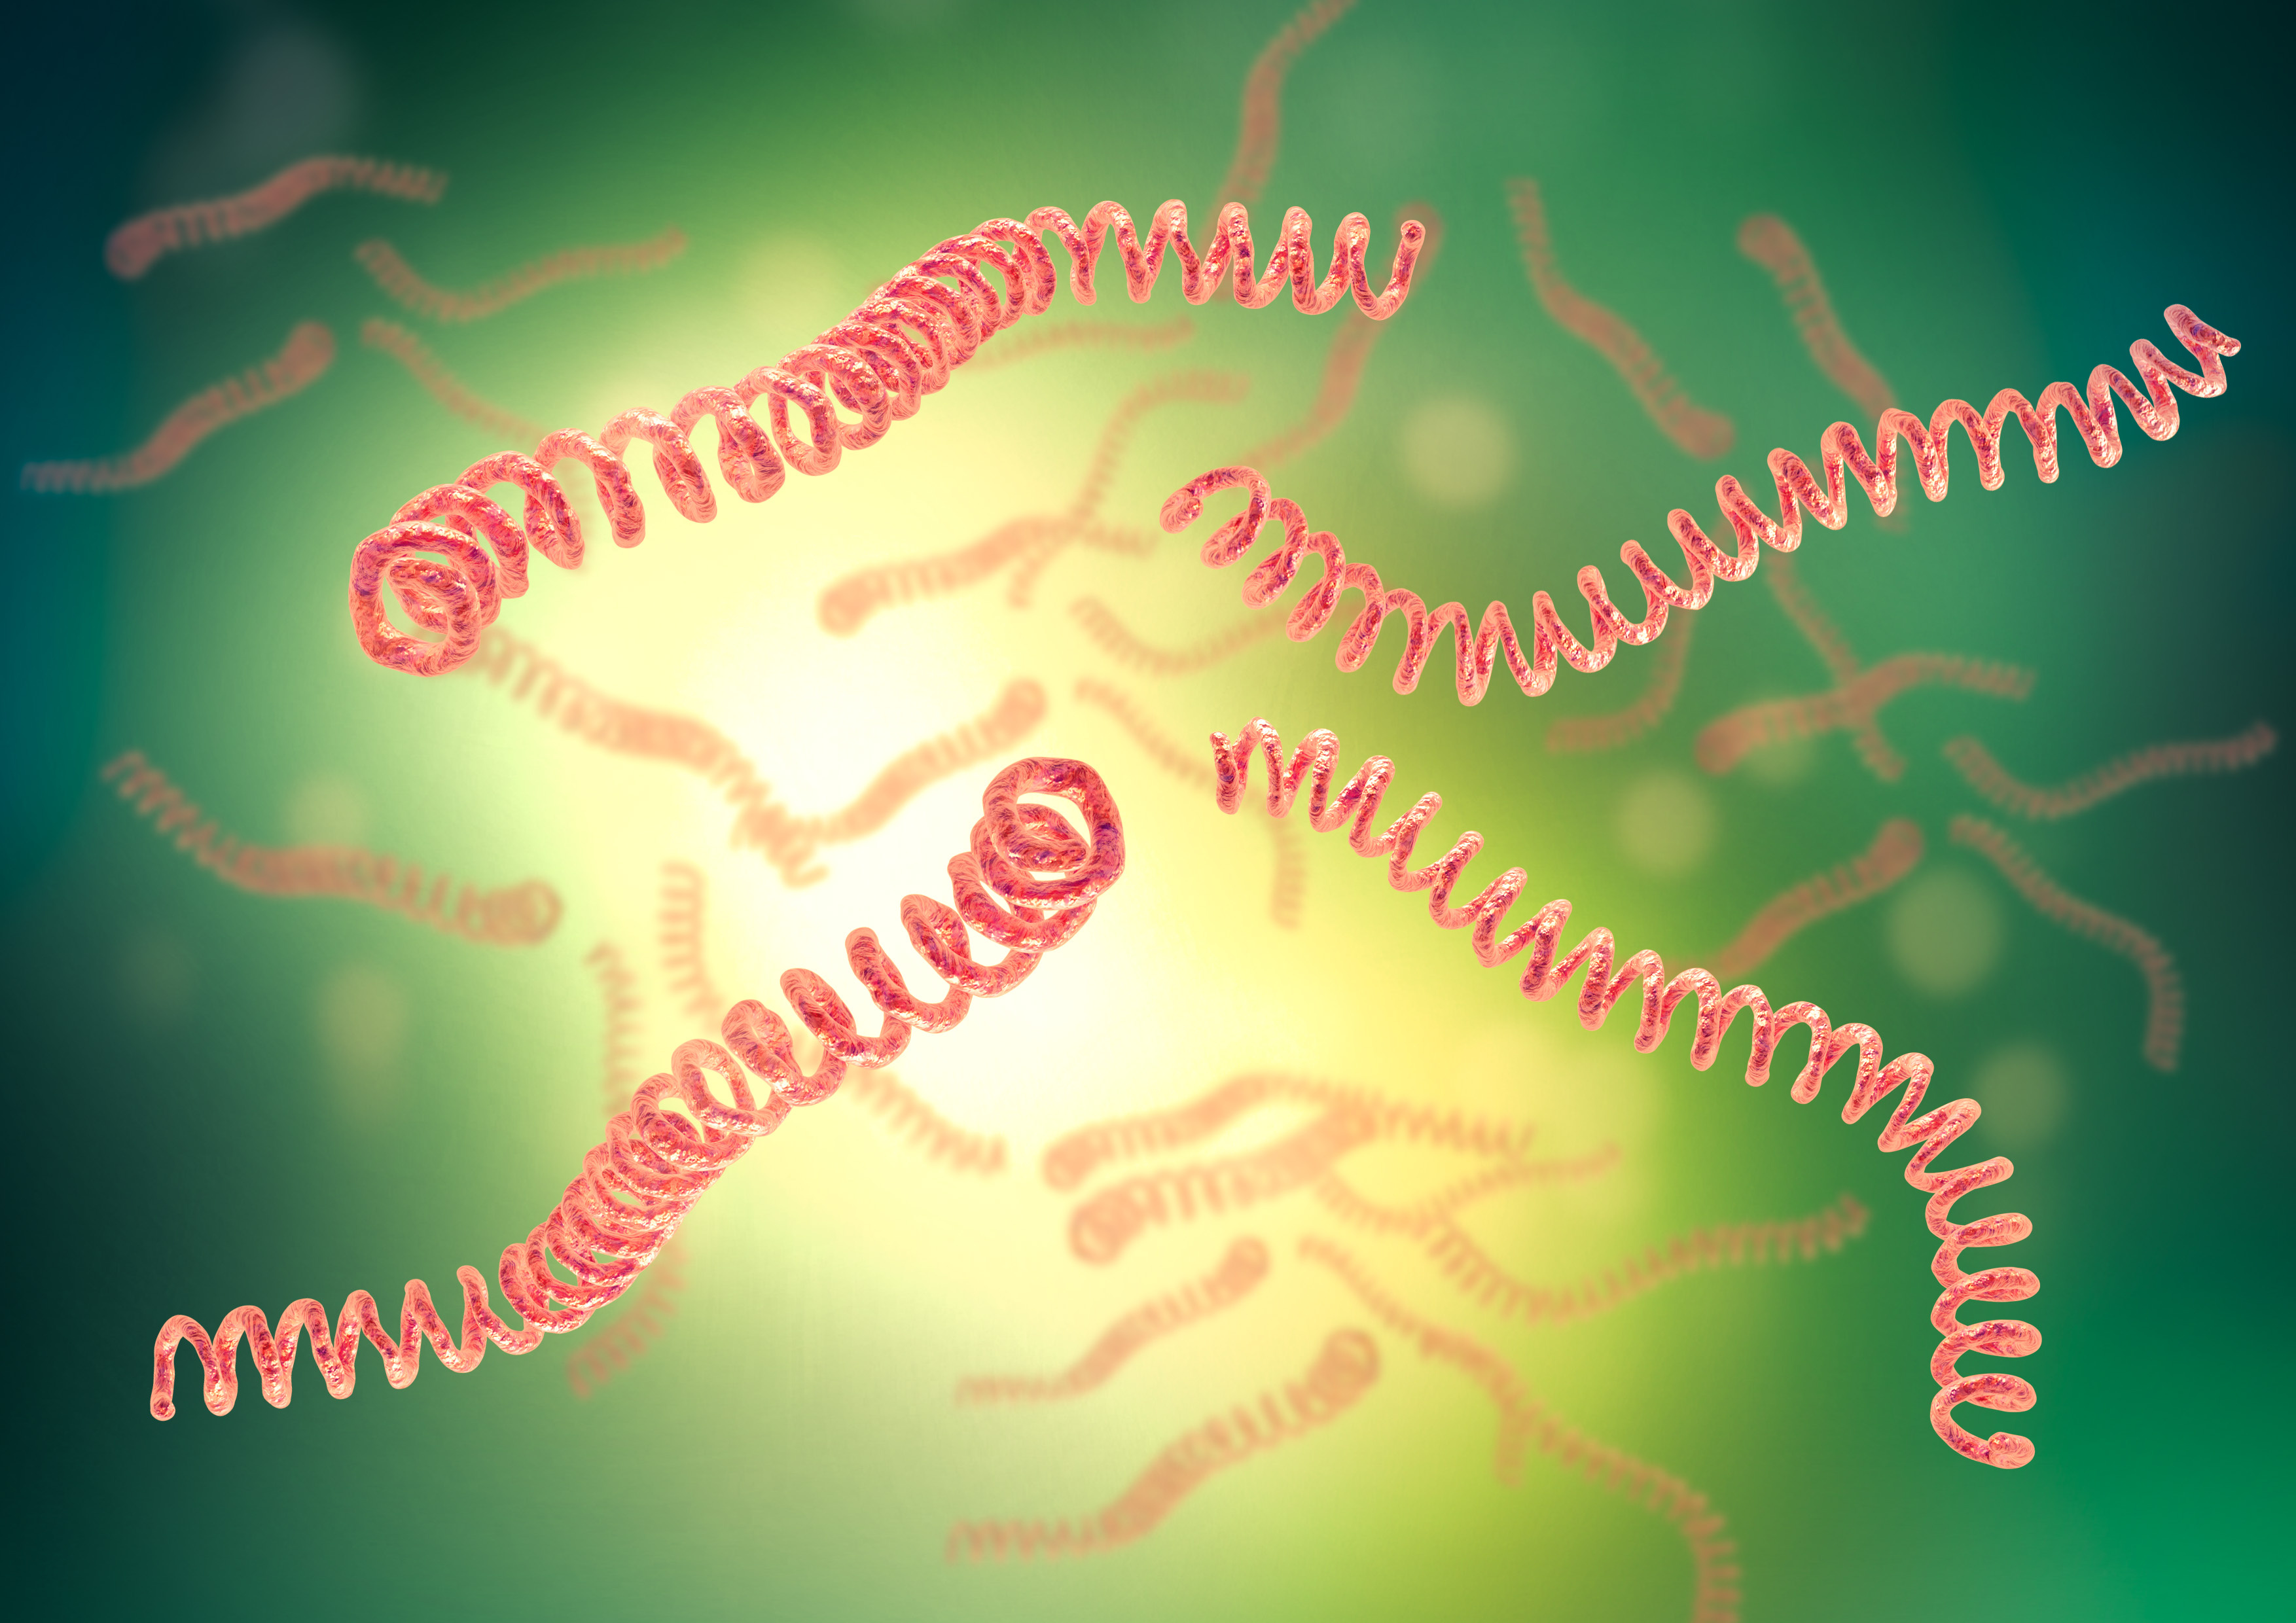 Red / ;ink sprial structures on green background - leptospirosis bacteria